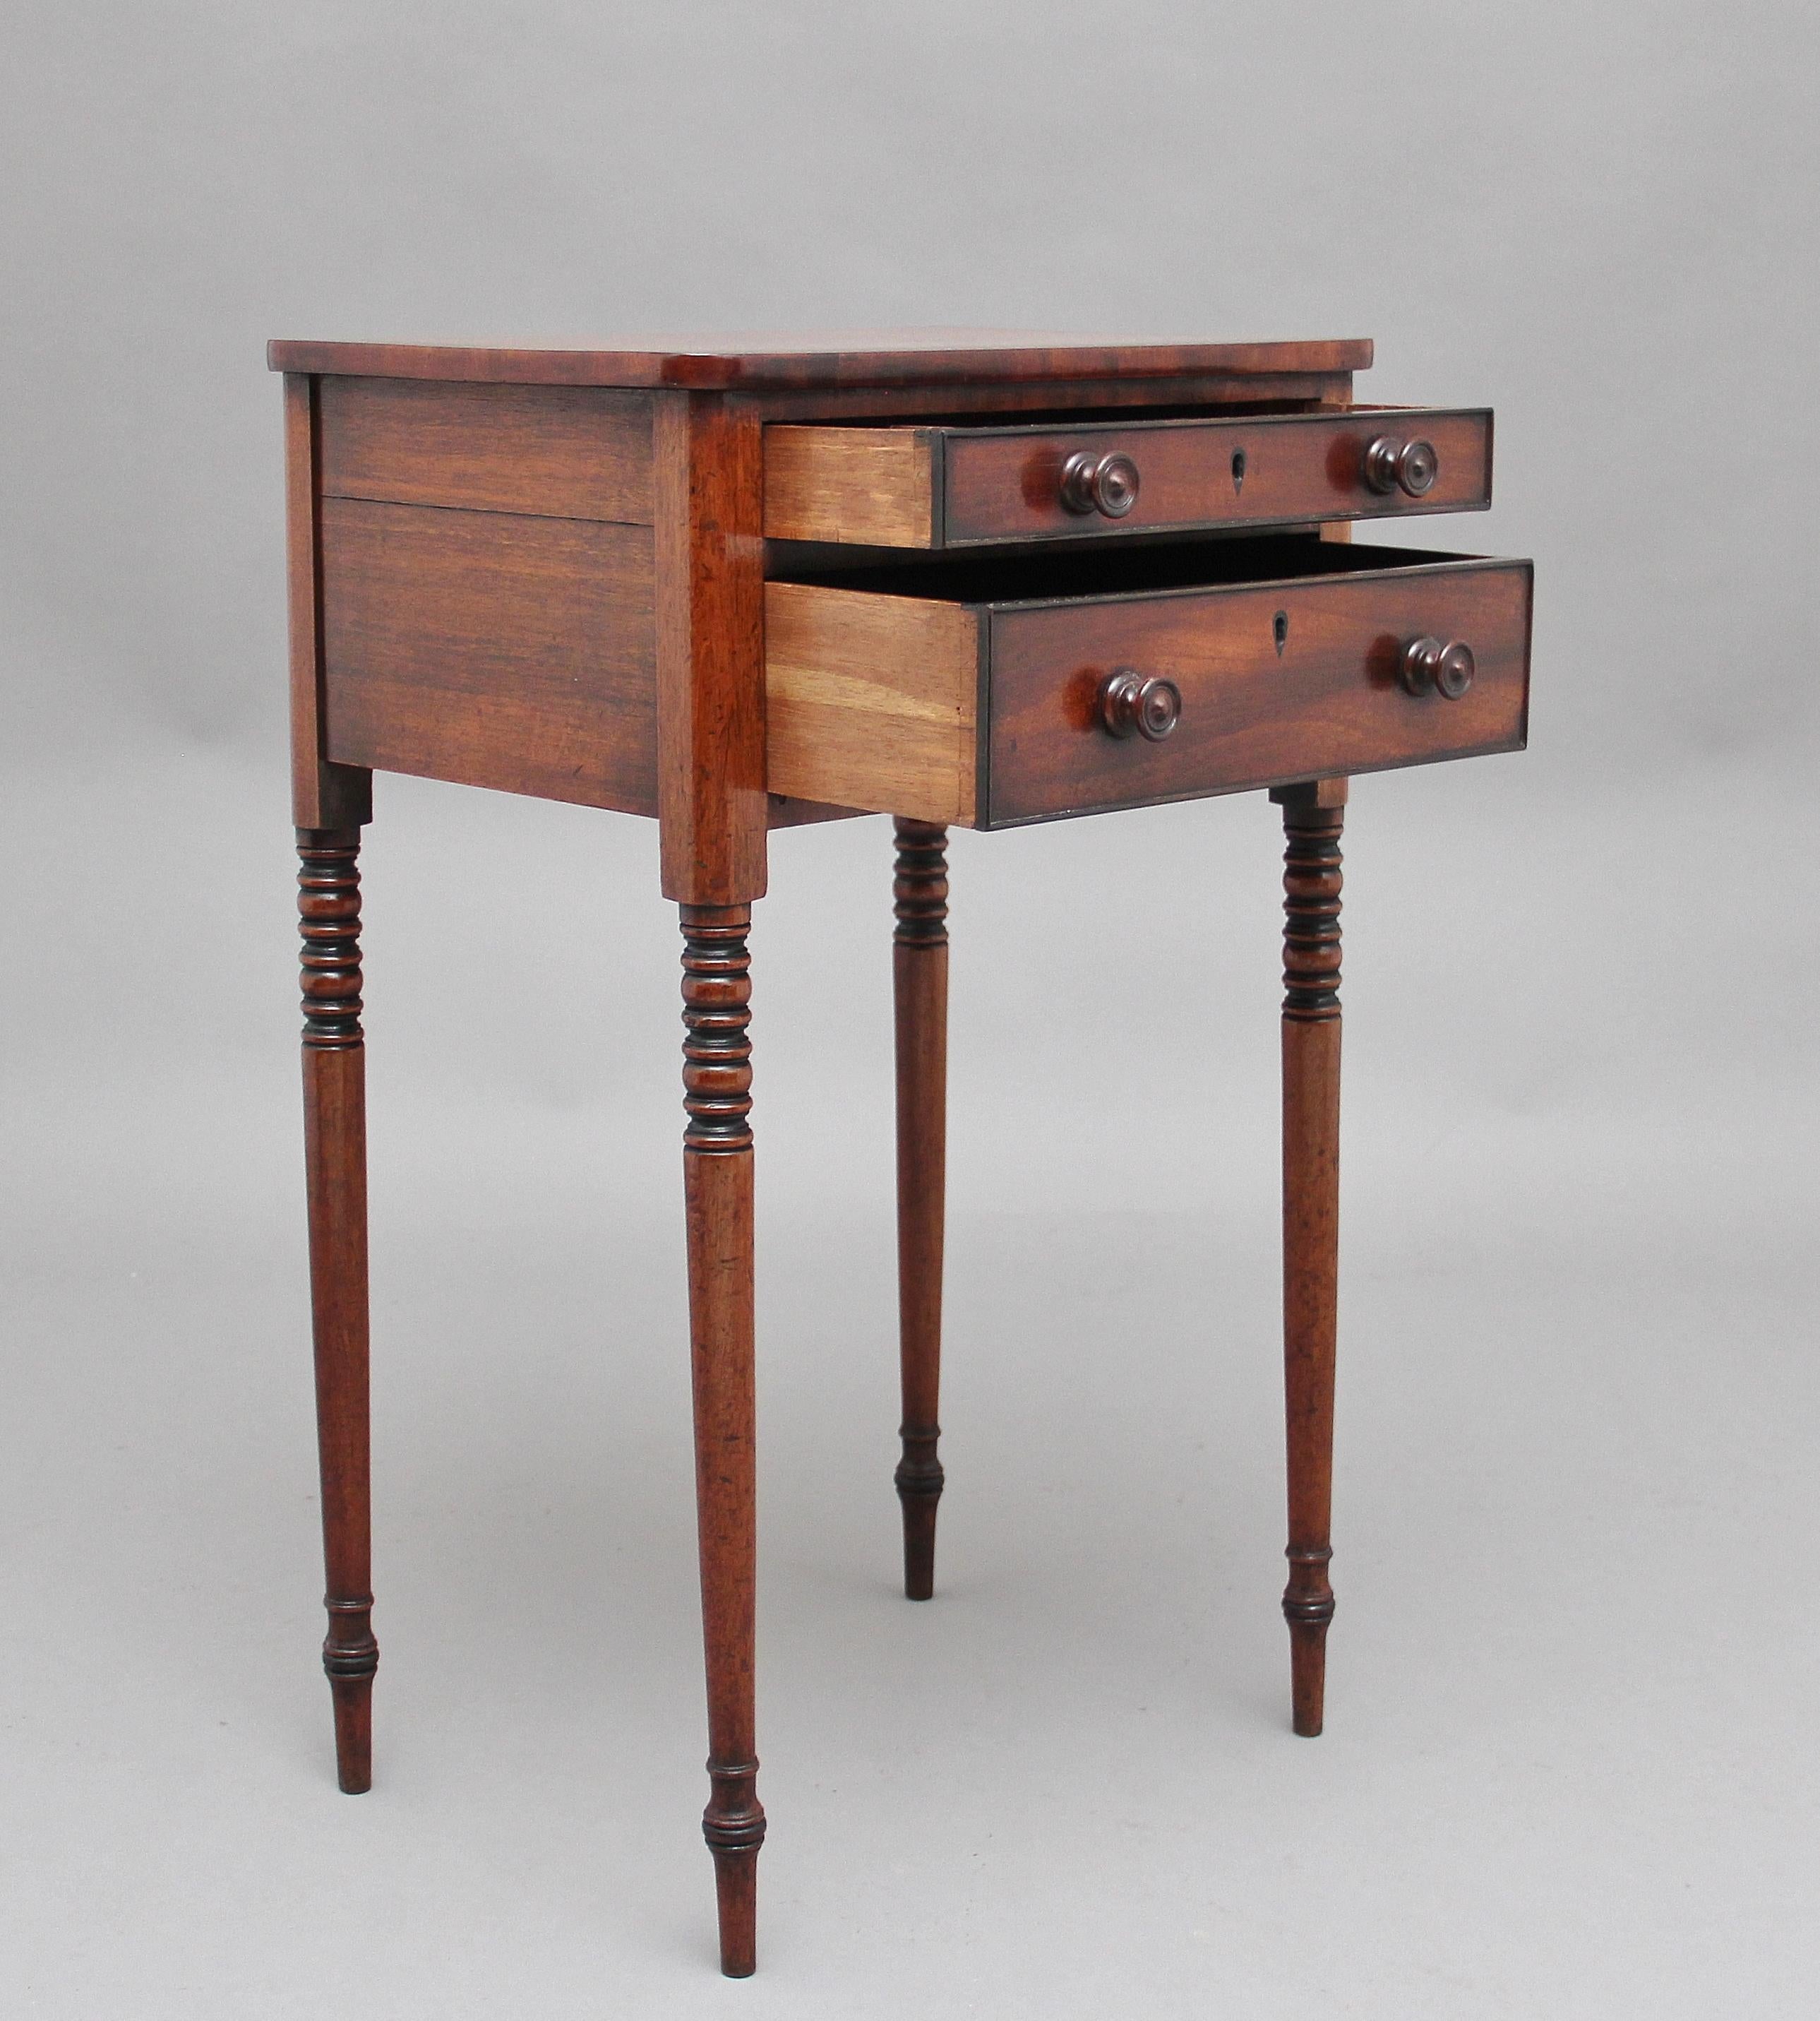 Early 19th century mahogany side or occasional table, the crossbanded top above two drawers of different depths, both oak lined and having original turned wooden knob handles, supported on elegant turned legs, circa 1830.